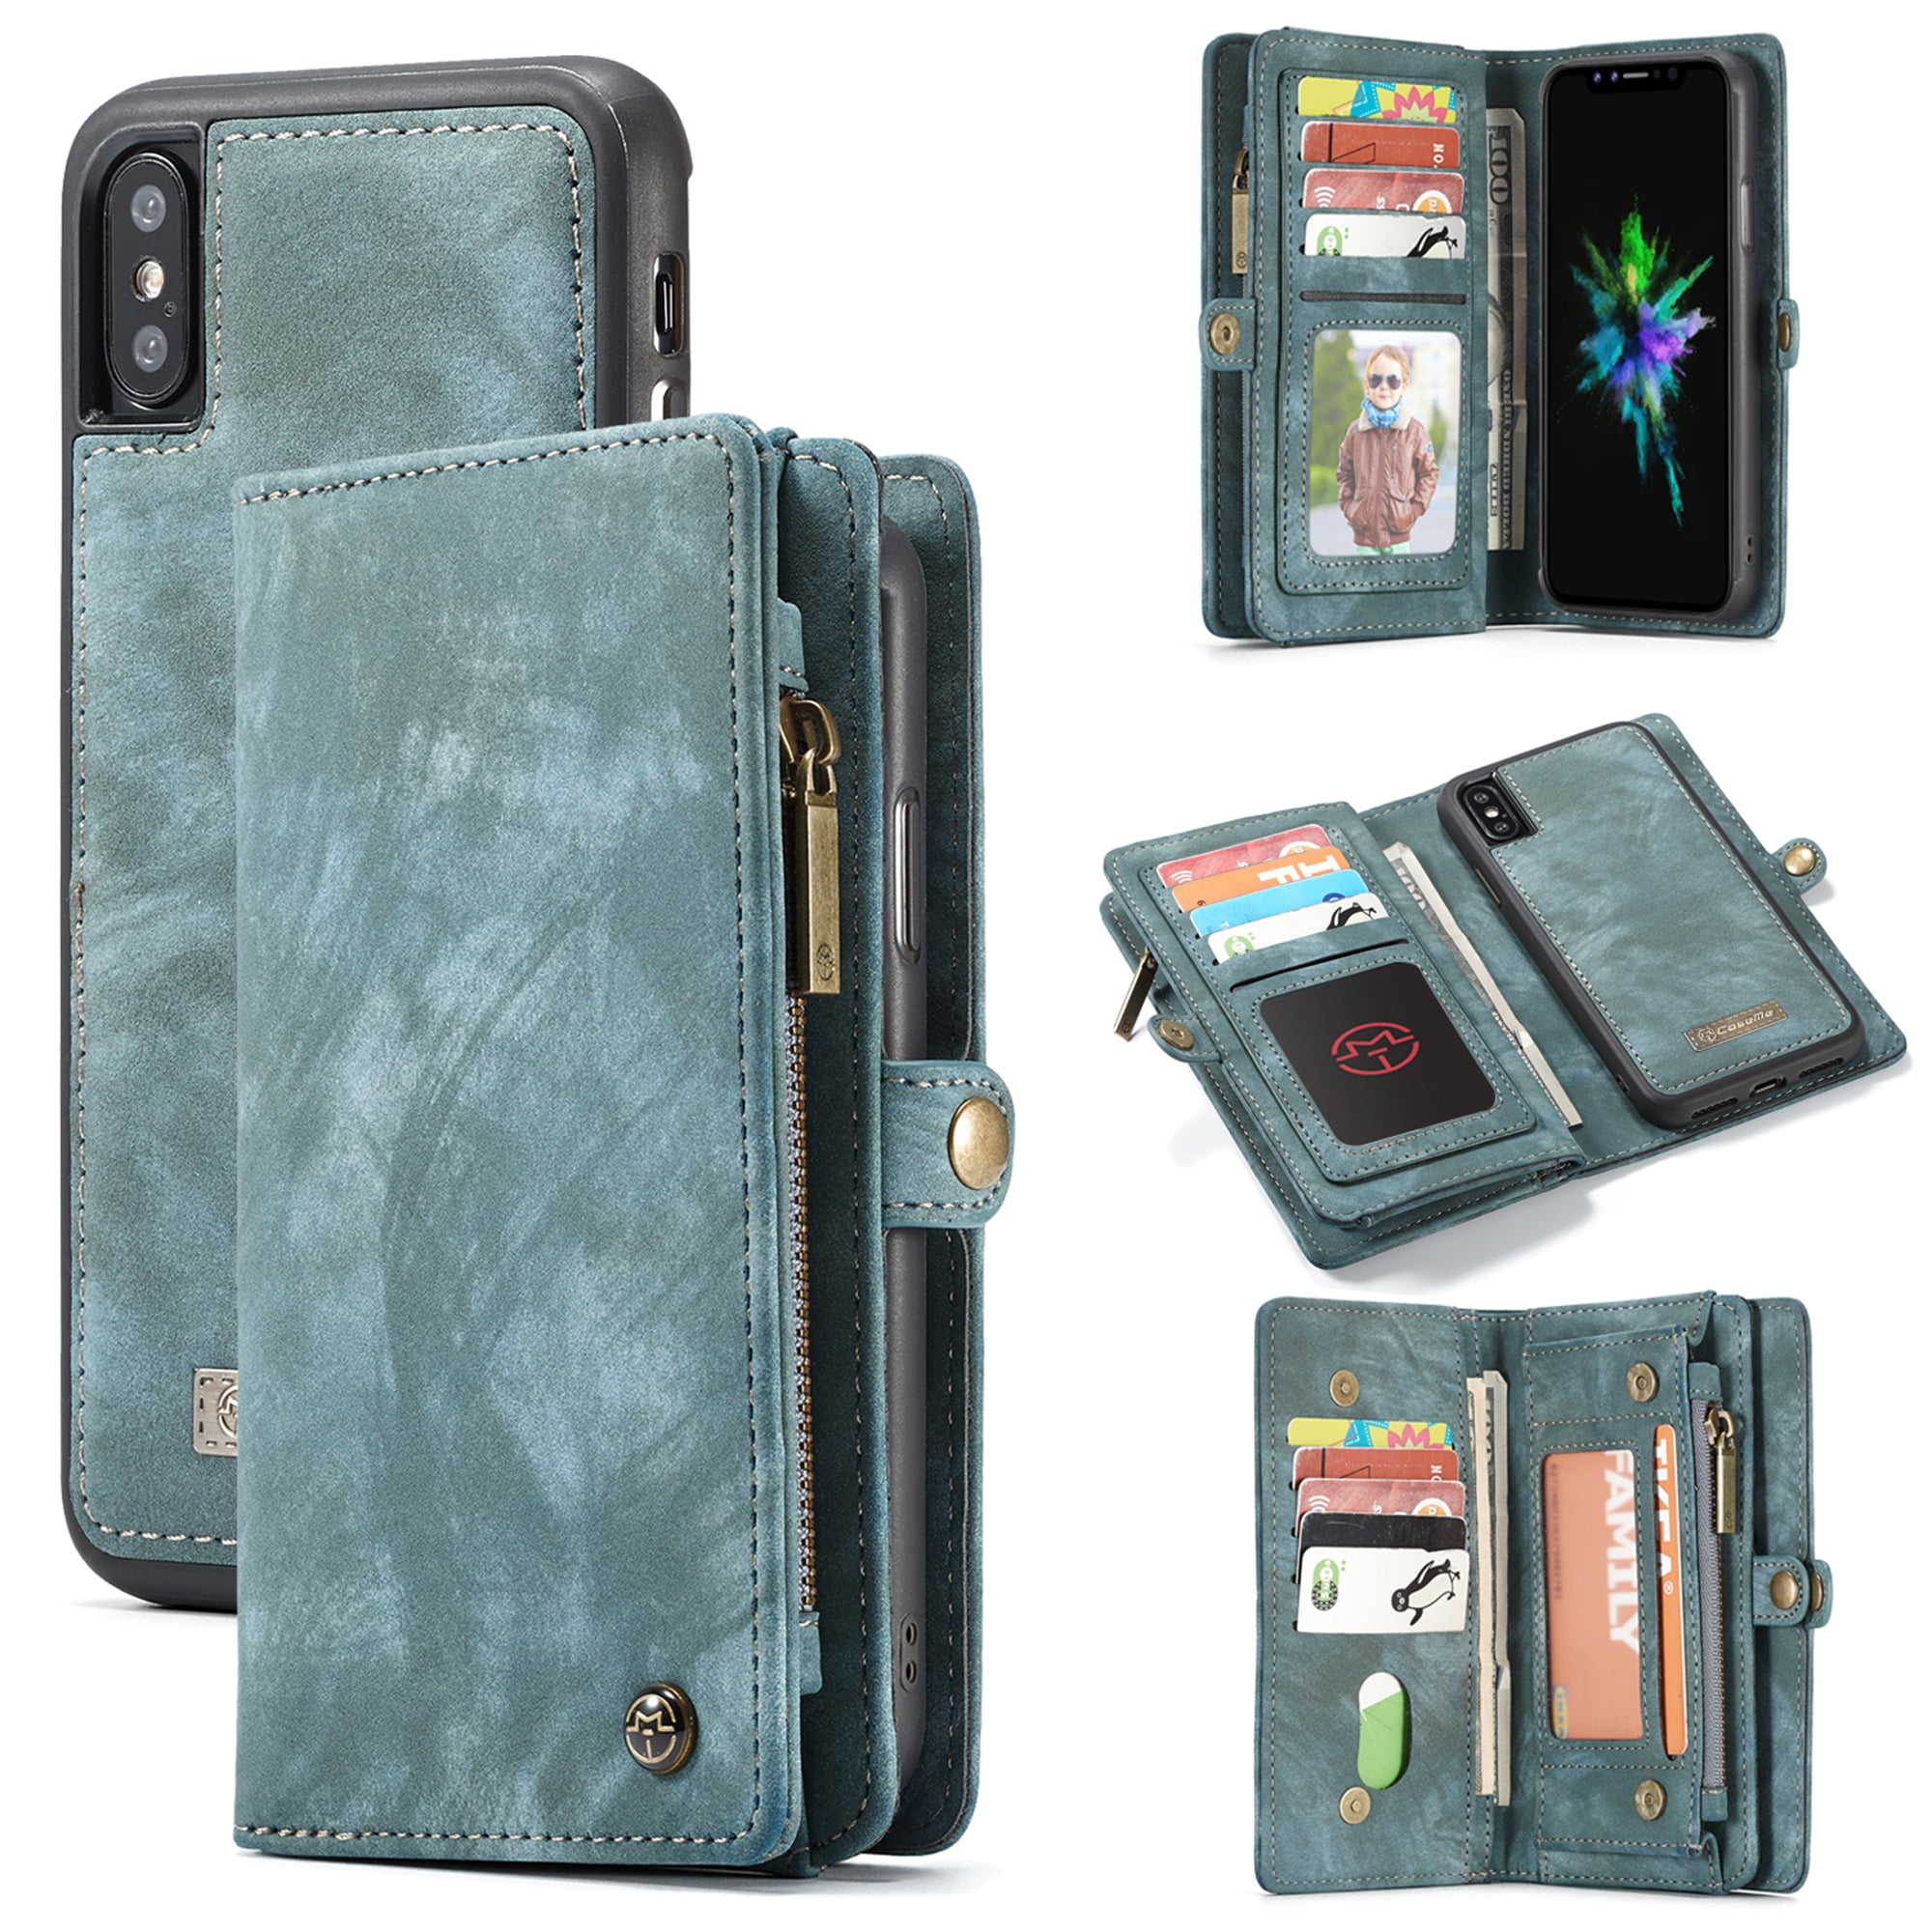 iPhone Xs Flip Case Cover for Leather Card Holders Extra-Protective Business Kickstand Cell Phone case Flip Cover